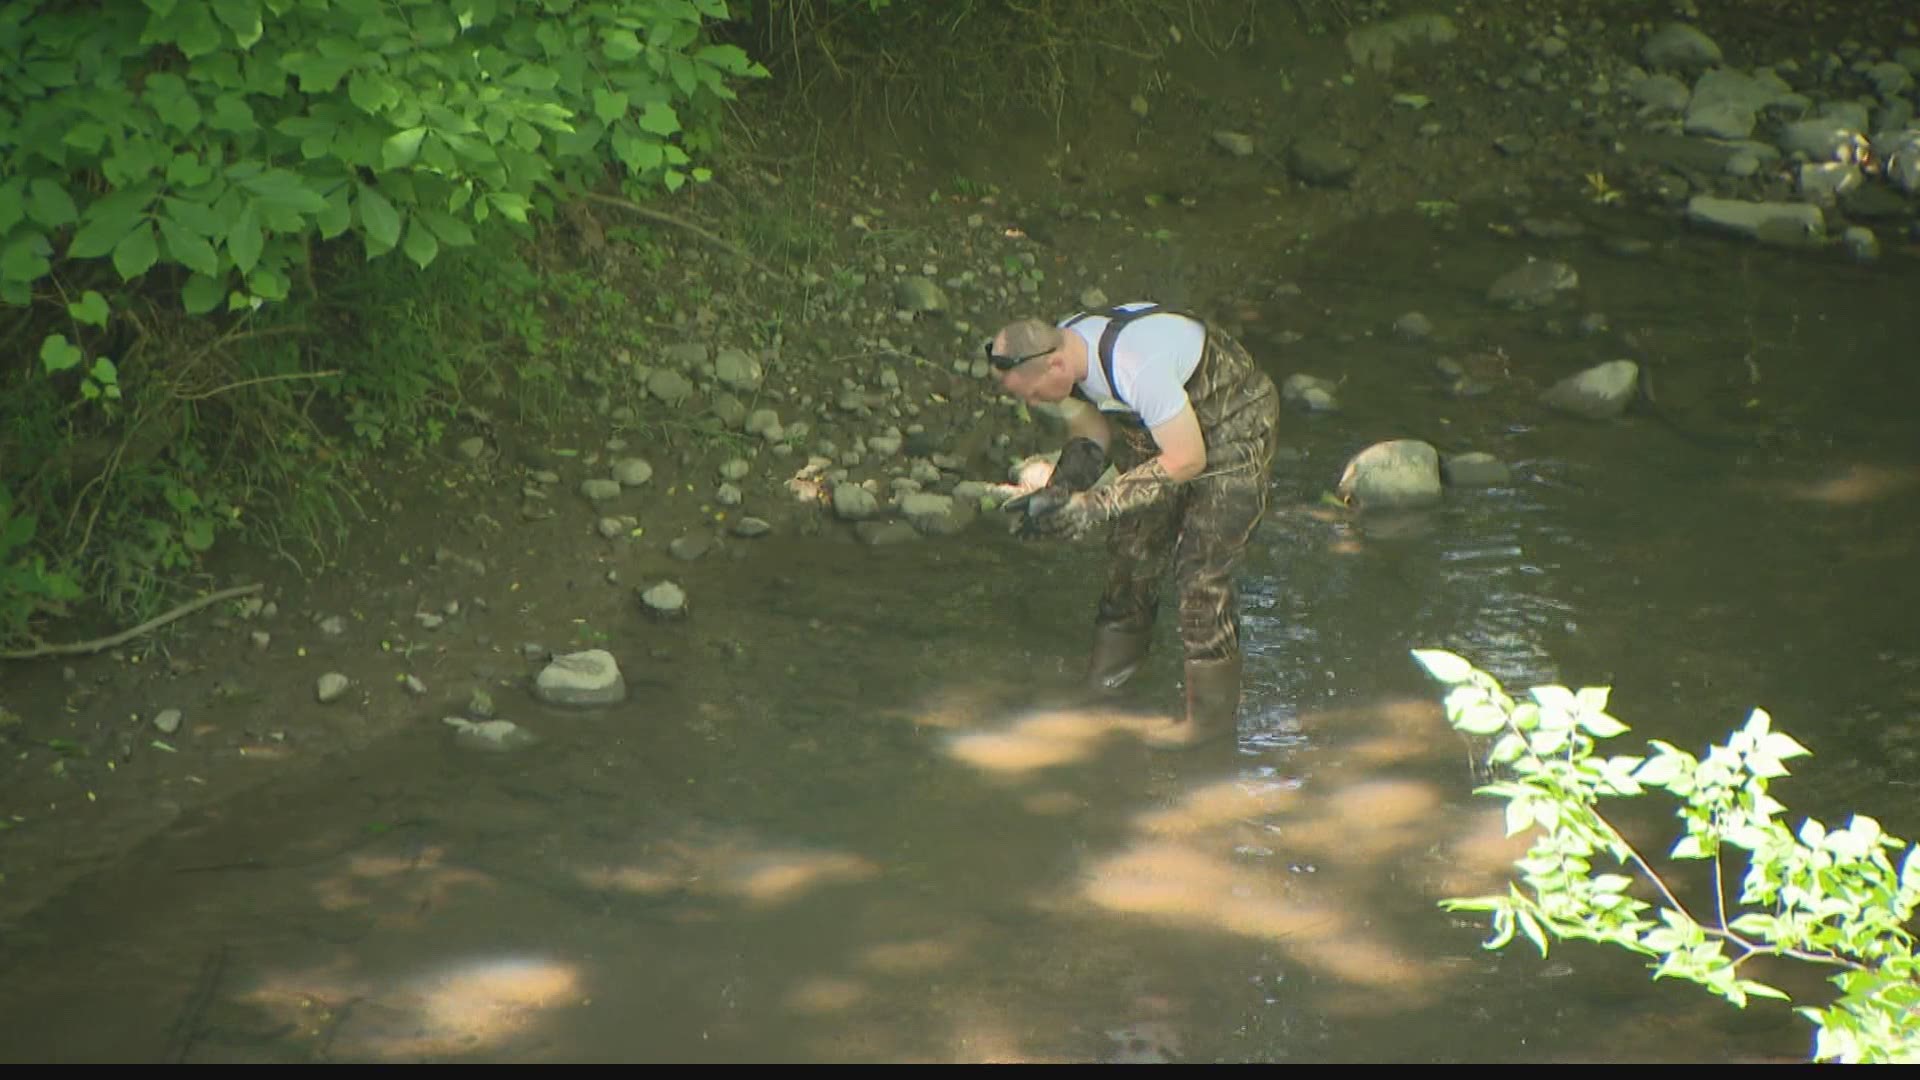 Officials are investigating reports of dead fish in a creek in Fishers.